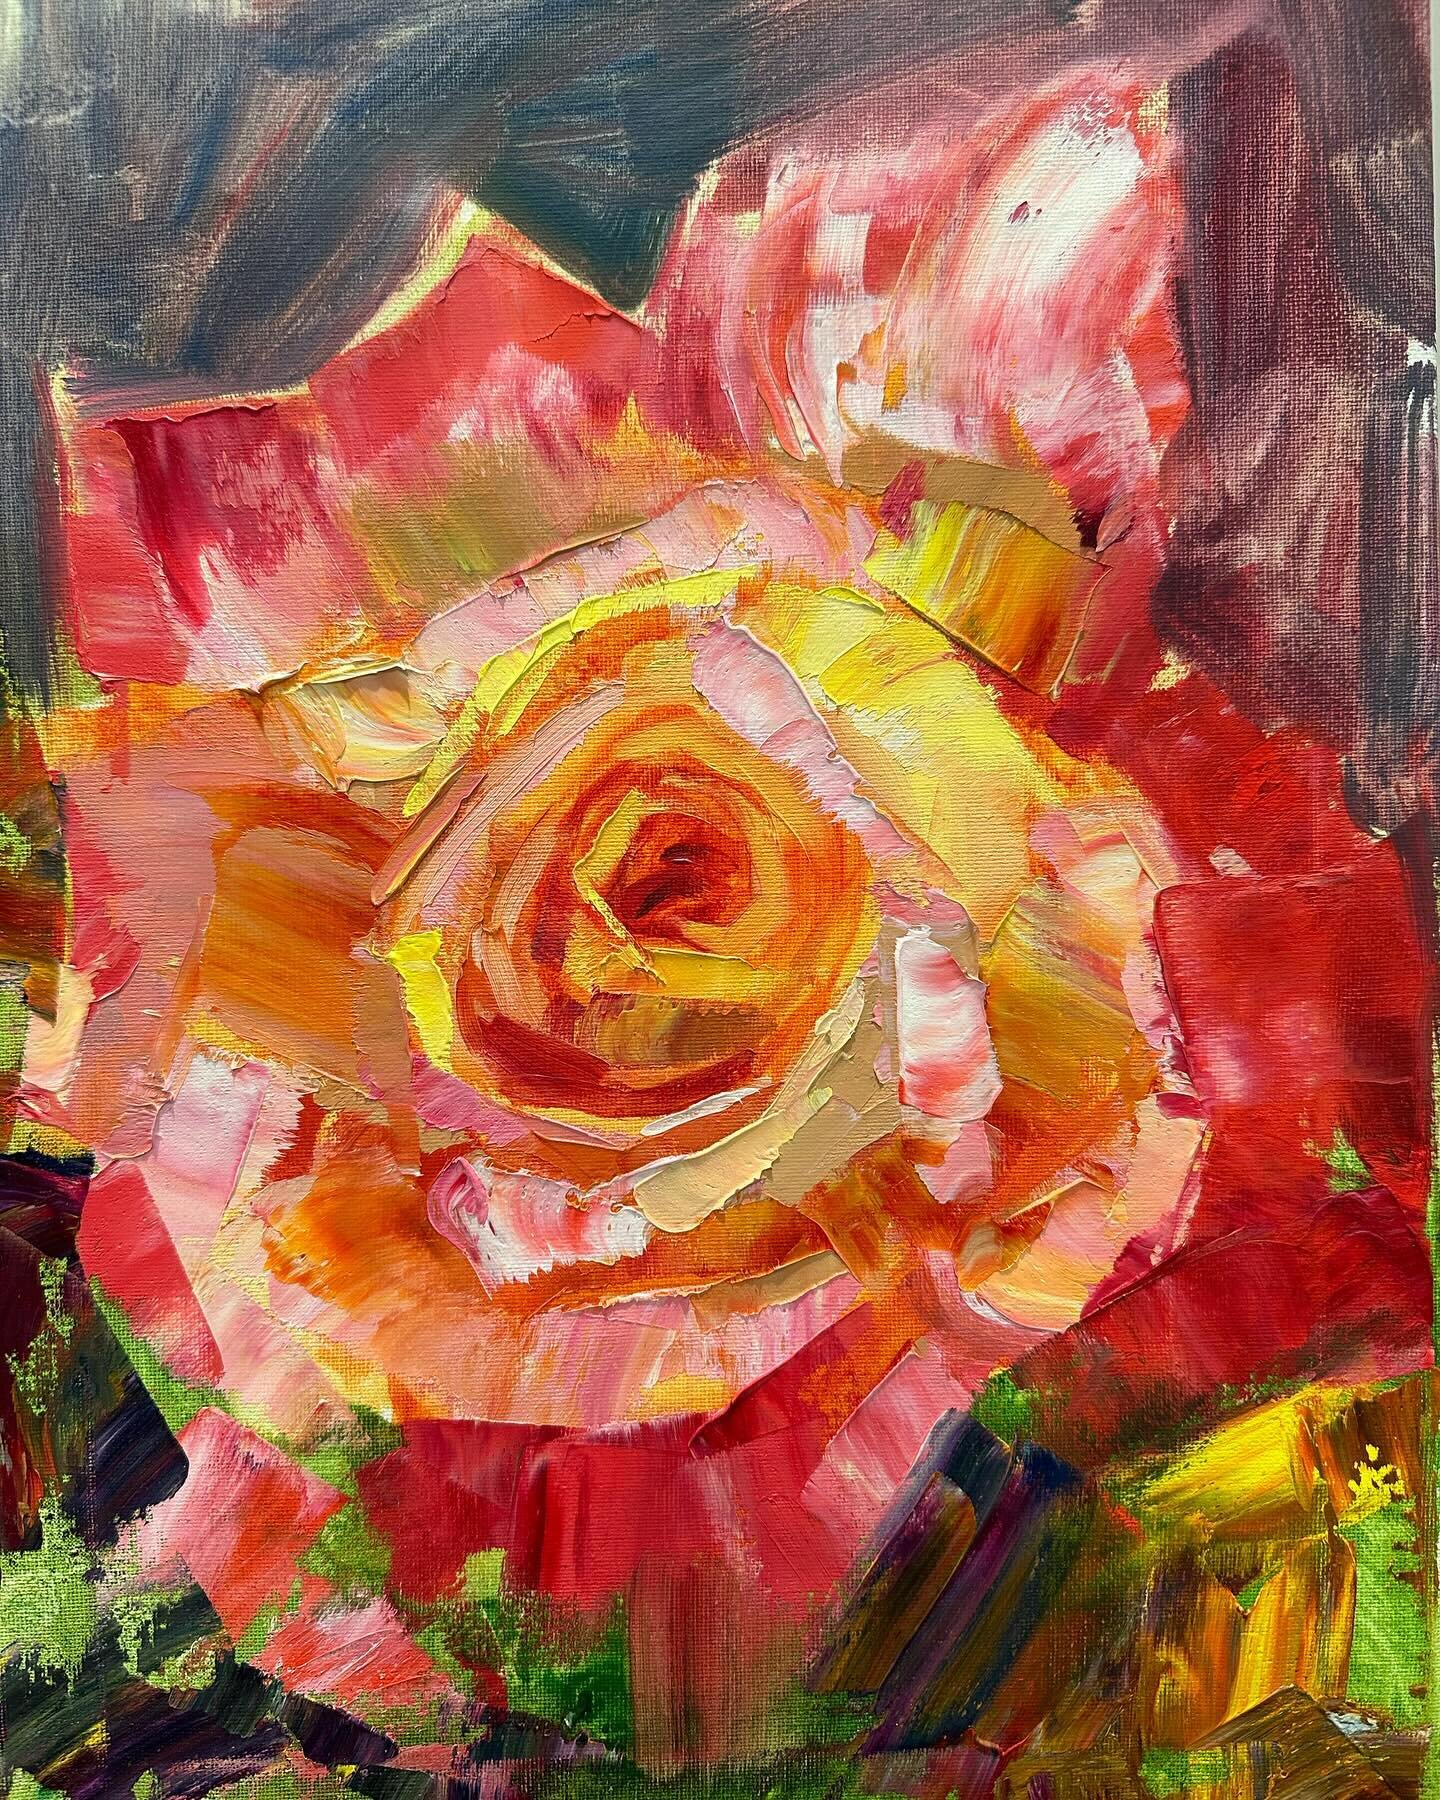 A quick 10 minute study of a Peace Hybrid Tea Rose. This might be my favorite rose if I had to choose. I was in a playful mood and wanted to make something beautiful to get warmed up. I have demoed roses for workshops in the past- wondering if you&rs